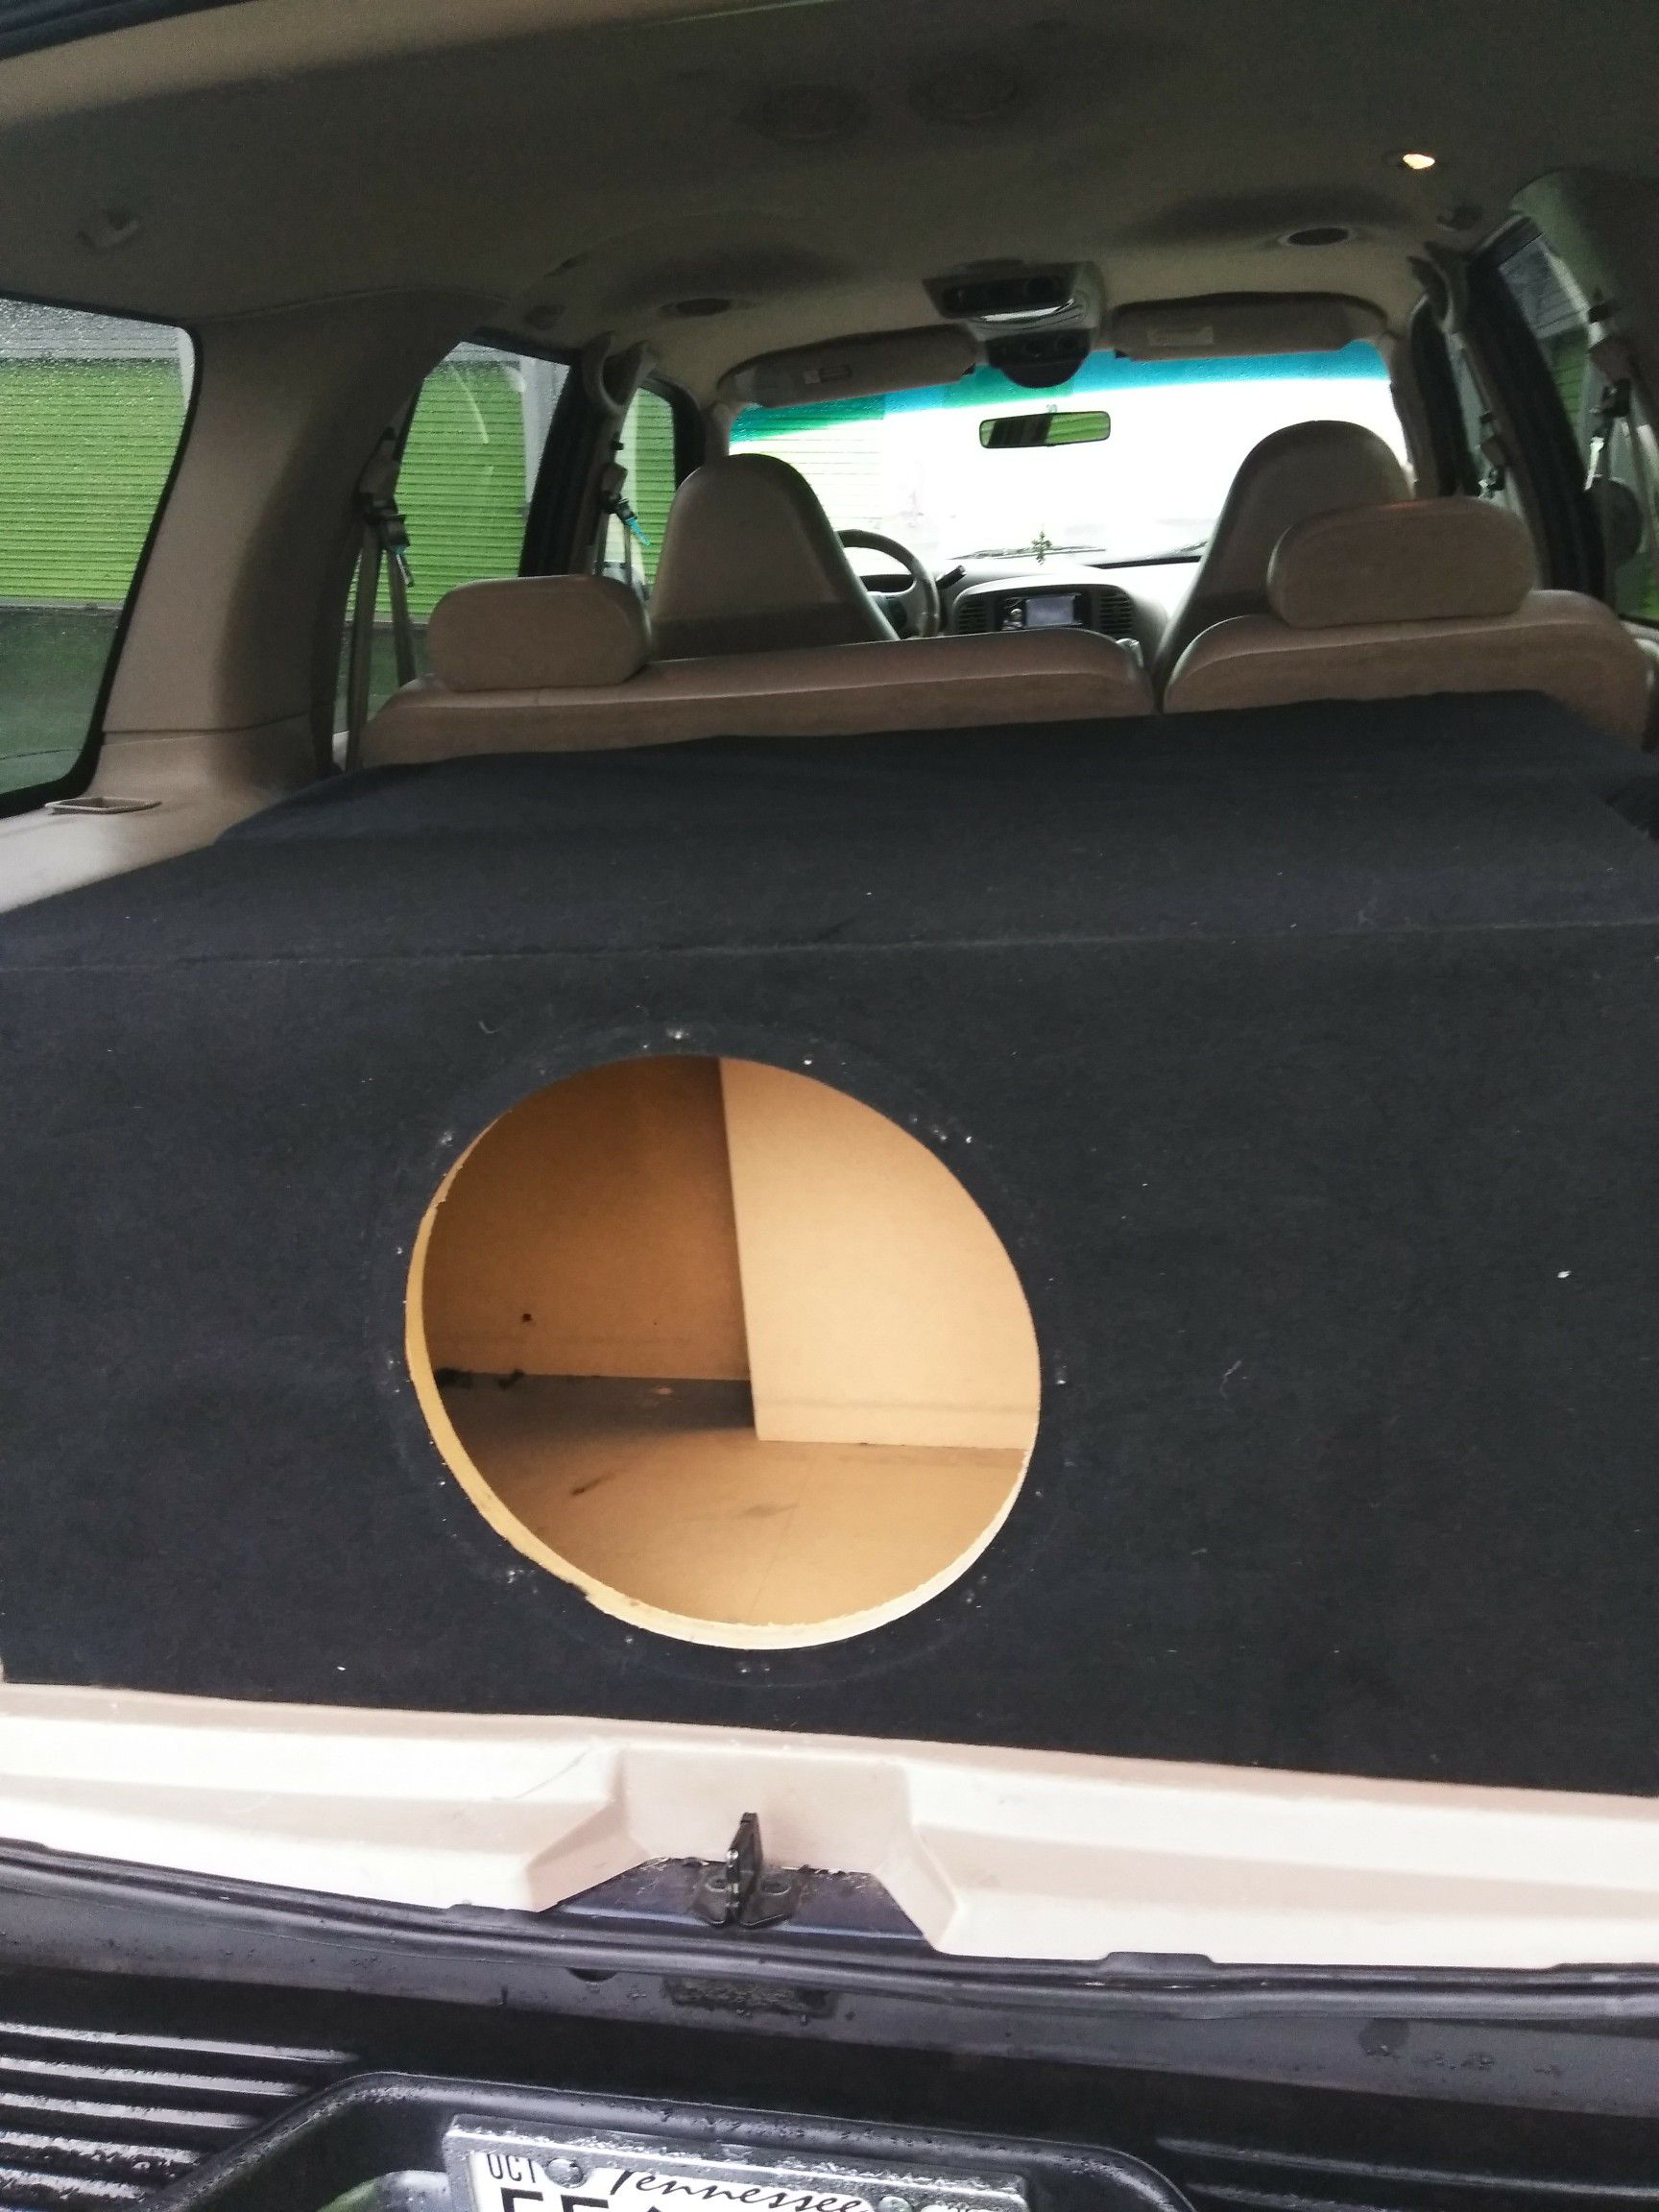 Sub box for a 15 inch subwoofer